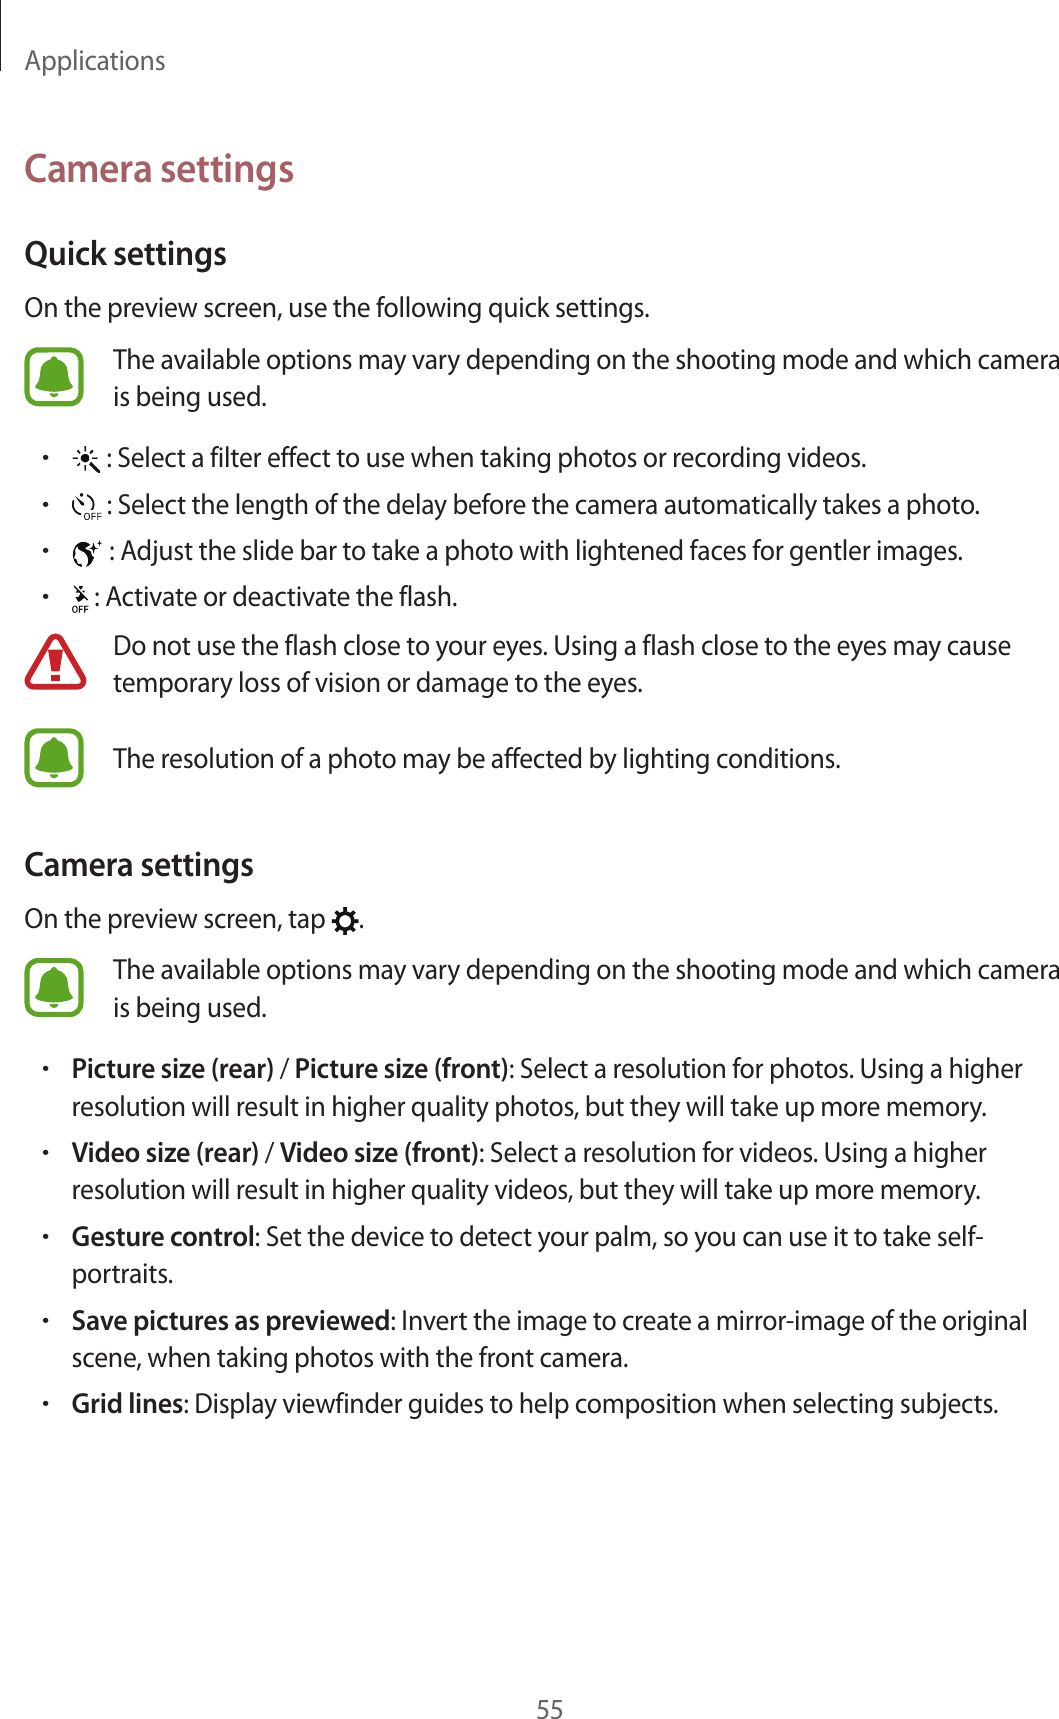 Applications55Camera settingsQuick settingsOn the preview screen, use the following quick settings.The available options may vary depending on the shooting mode and which camera is being used.• : Select a filter effect to use when taking photos or recording videos.• : Select the length of the delay before the camera automatically takes a photo.• : Adjust the slide bar to take a photo with lightened faces for gentler images.• : Activate or deactivate the flash.Do not use the flash close to your eyes. Using a flash close to the eyes may cause temporary loss of vision or damage to the eyes.The resolution of a photo may be affected by lighting conditions.Camera settingsOn the preview screen, tap  .The available options may vary depending on the shooting mode and which camera is being used.•Picture size (rear) / Picture size (front): Select a resolution for photos. Using a higher resolution will result in higher quality photos, but they will take up more memory.•Video size (rear) / Video size (front): Select a resolution for videos. Using a higher resolution will result in higher quality videos, but they will take up more memory.•Gesture control: Set the device to detect your palm, so you can use it to take self-portraits.•Save pictures as previewed: Invert the image to create a mirror-image of the original scene, when taking photos with the front camera.•Grid lines: Display viewfinder guides to help composition when selecting subjects.